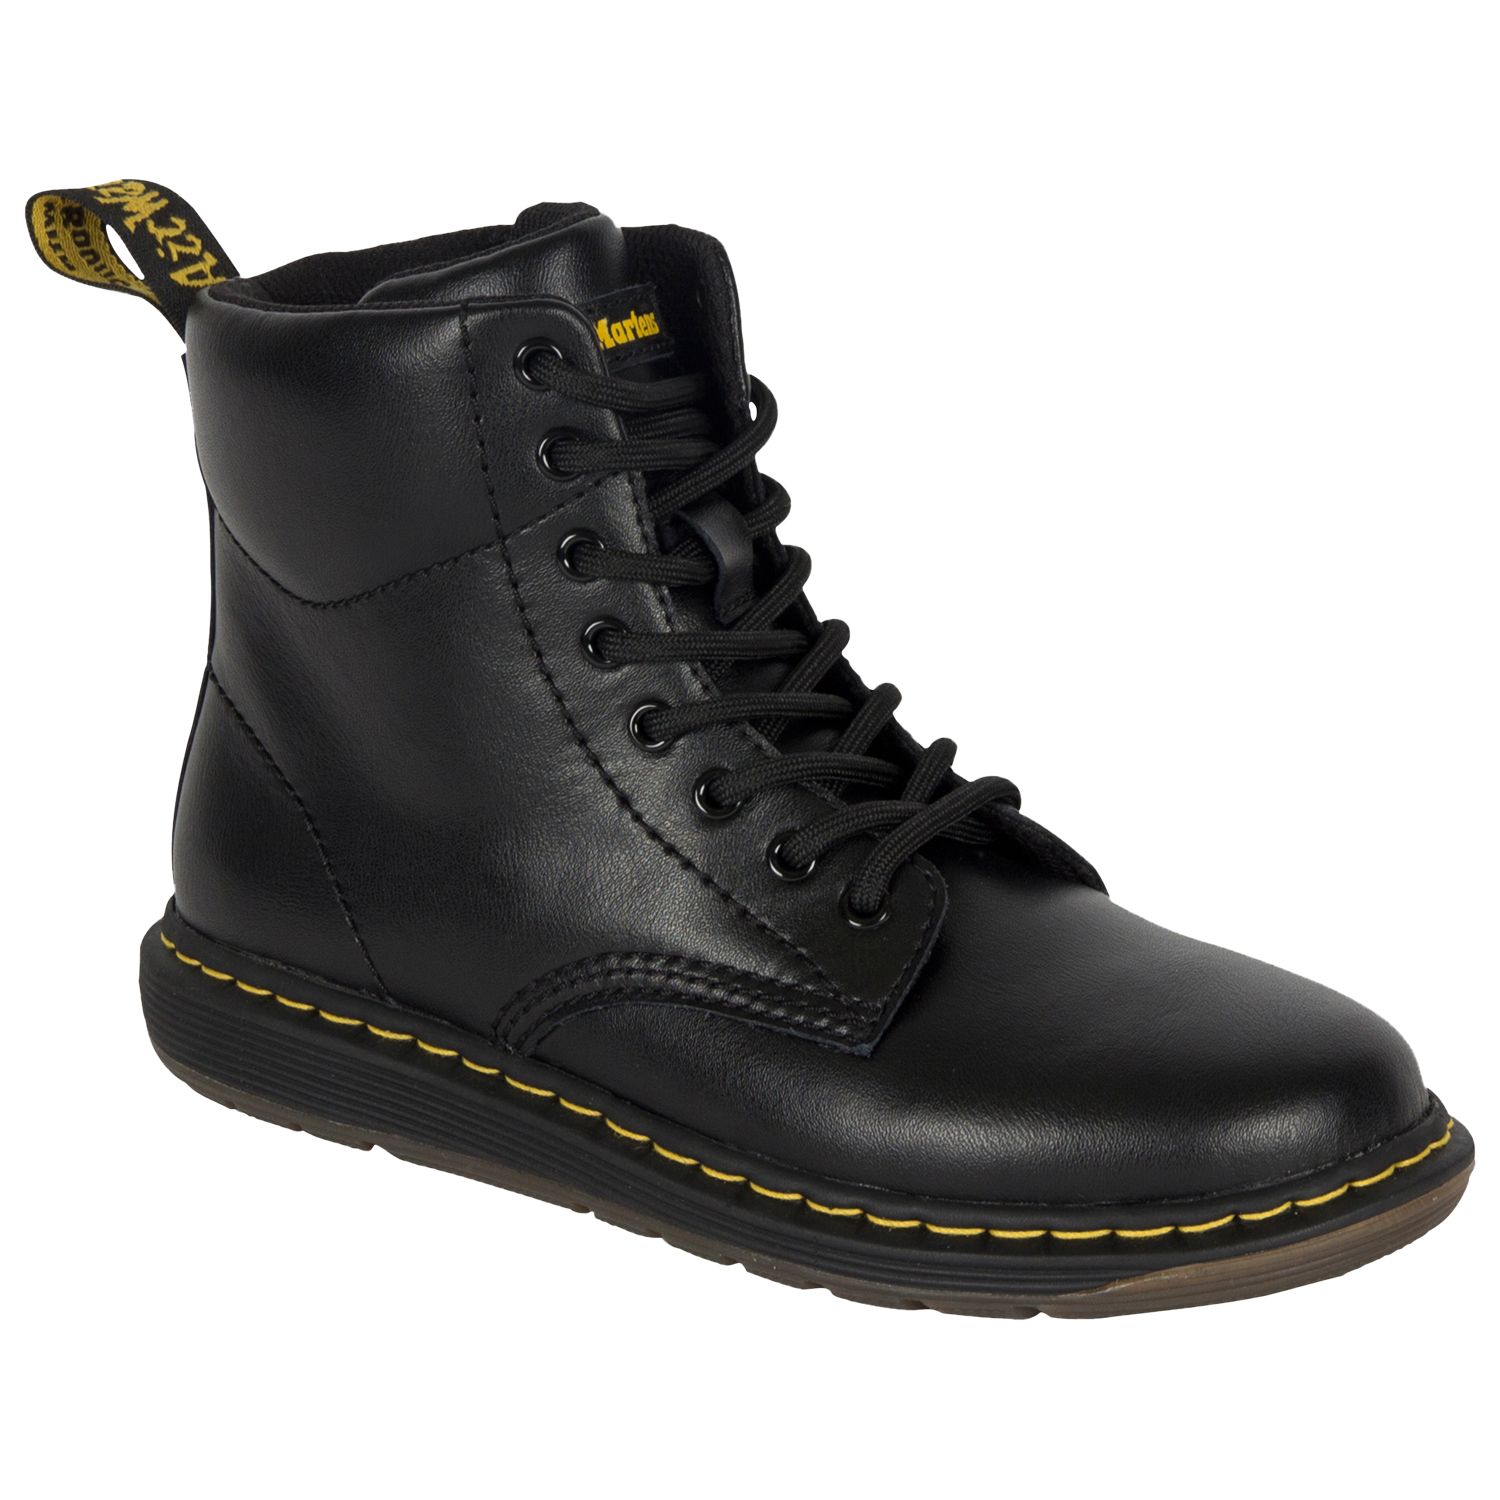 Dr Martens Malky Boots, Black